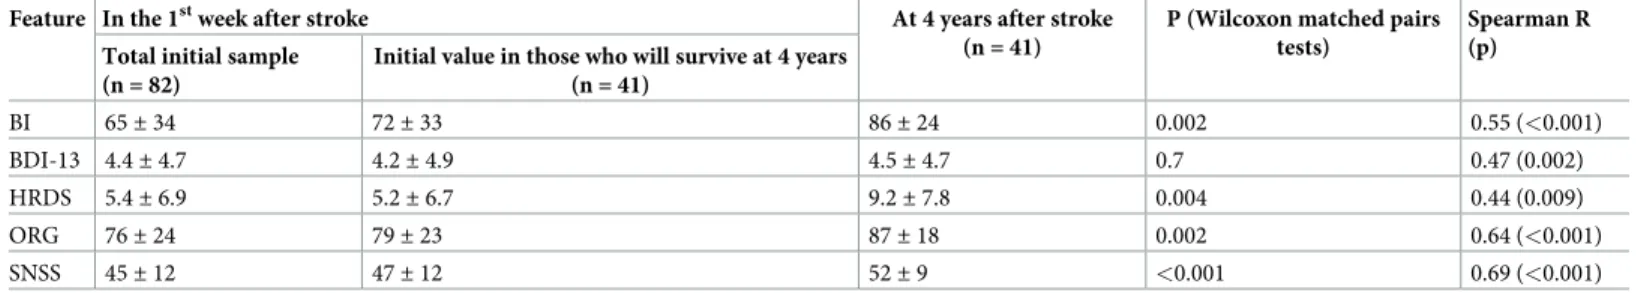 Table 1. The severity of stroke signs and depressive symptoms in the acute phase, and in survivors 4 years after stroke (n = 41).